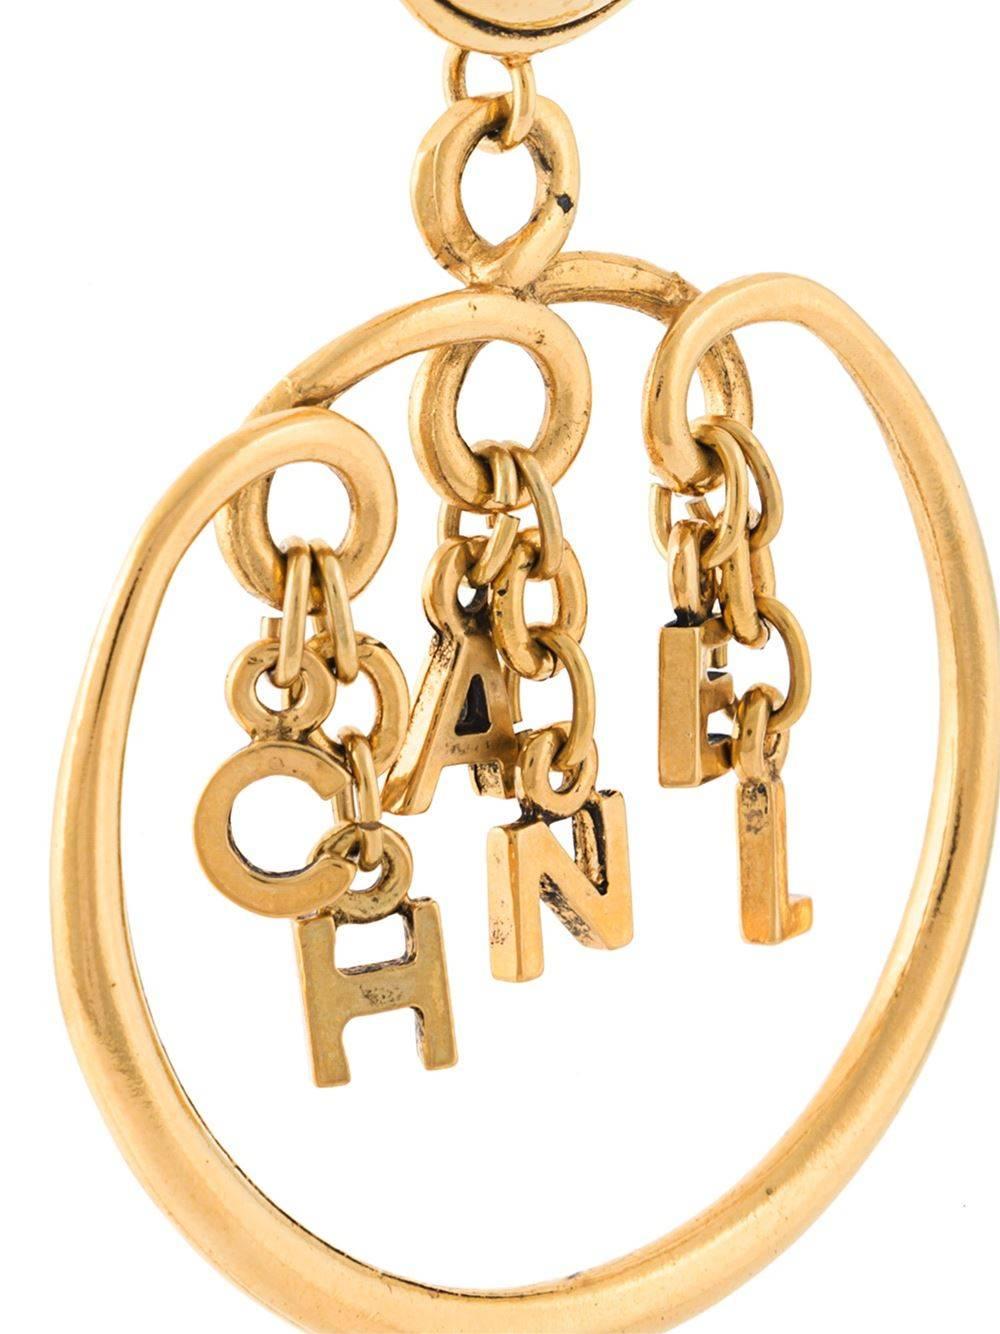 Gold-tone metal logo charm hoop clip-on earrings.

Colour: Gold-tone

Material: Metal (Other) 100%

Measurements: Circumference: 12cm

Condition: 8.5 out of 10
Excellent